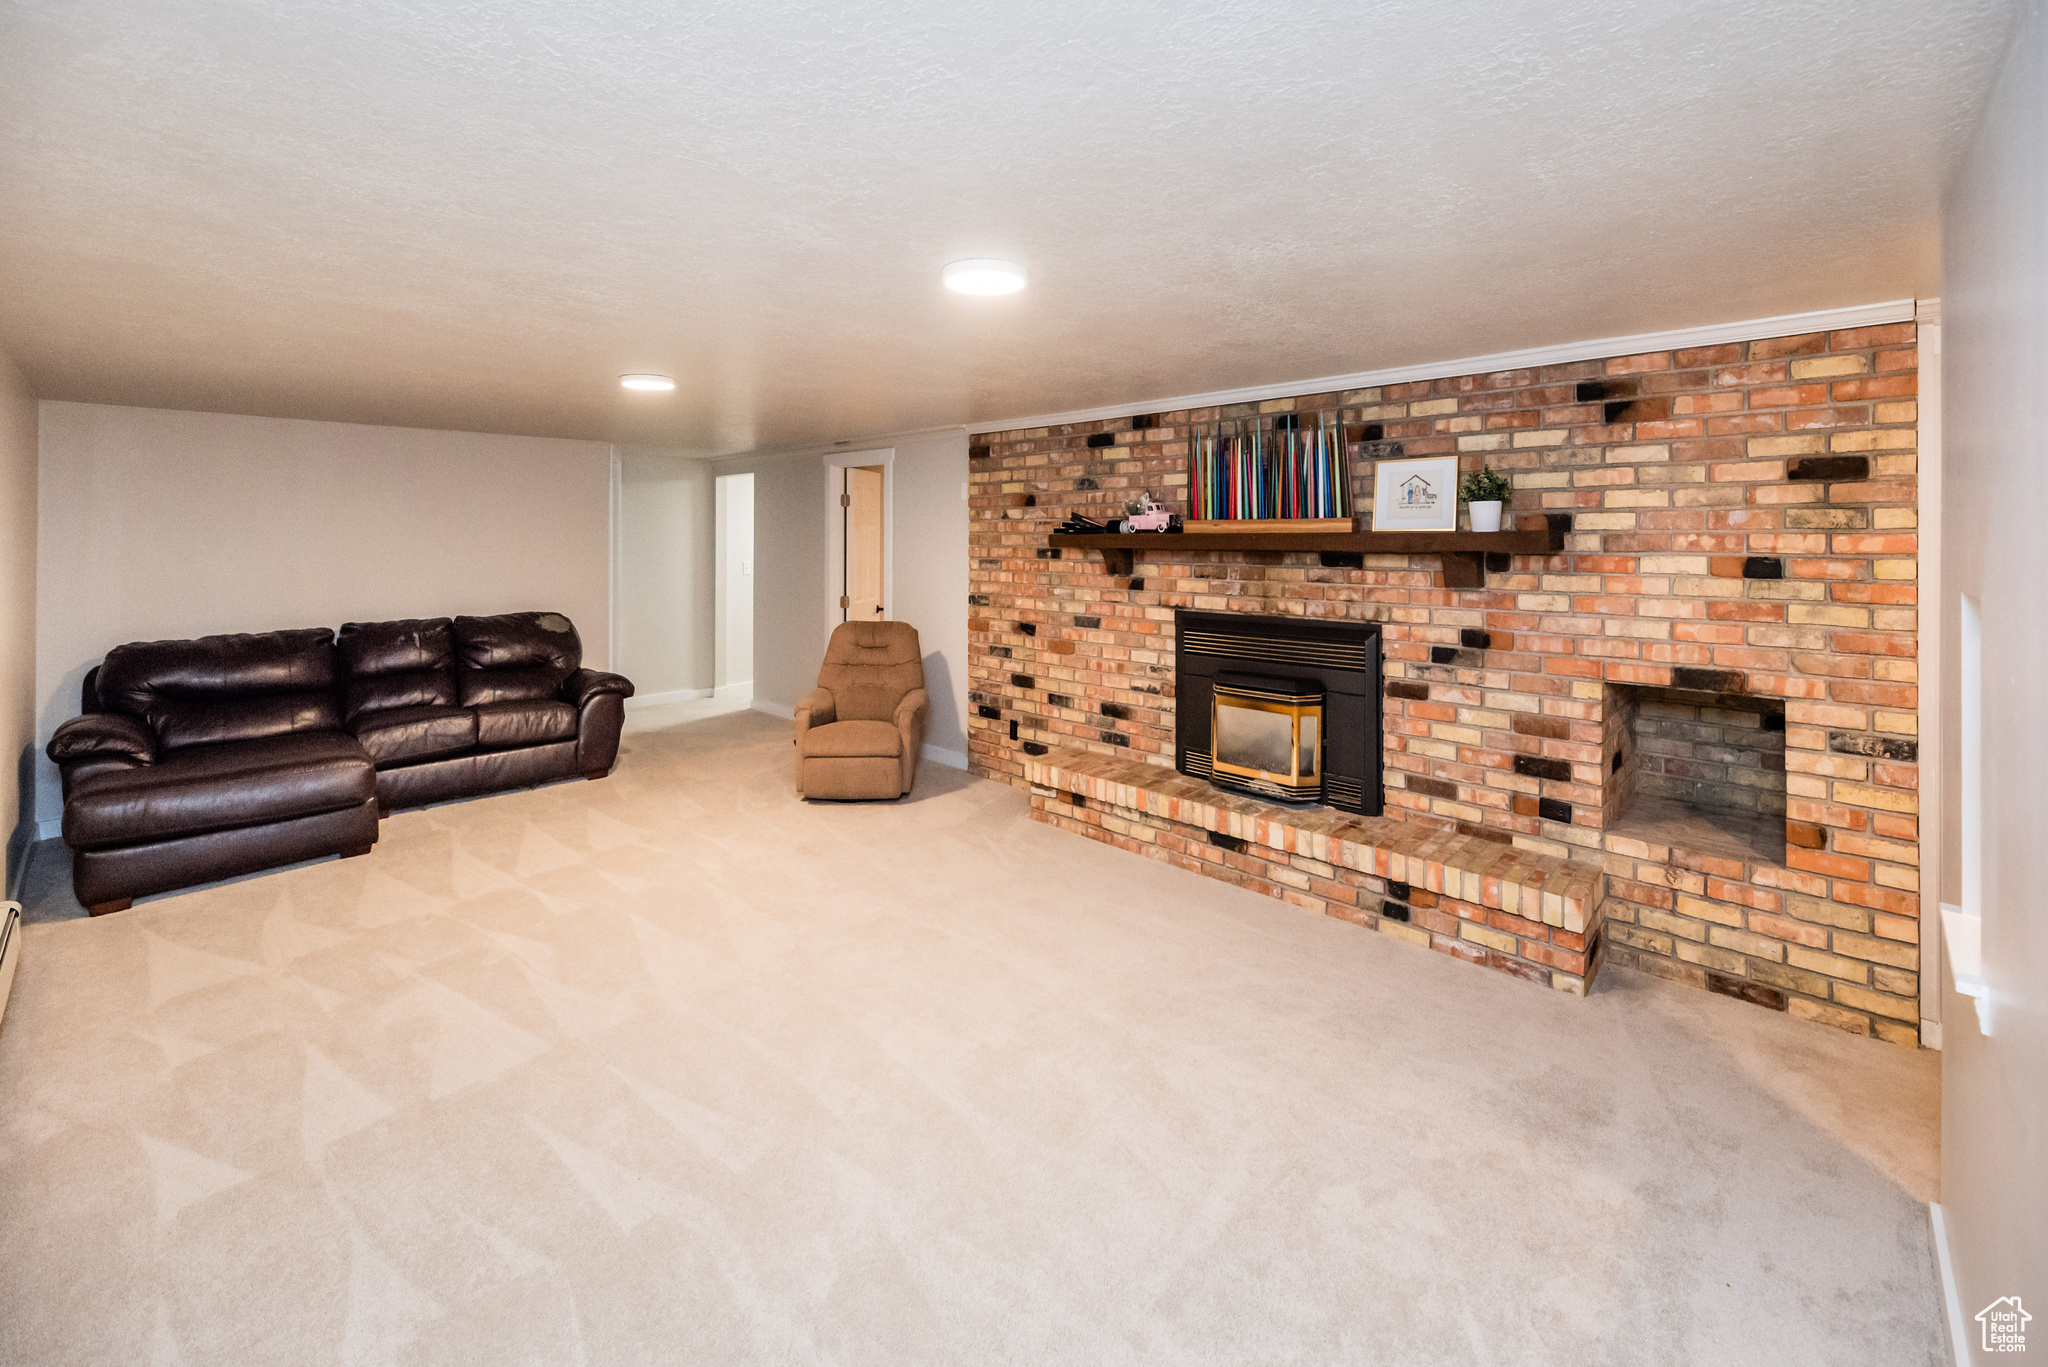 Living room featuring a textured ceiling, carpet, and a brick fireplace